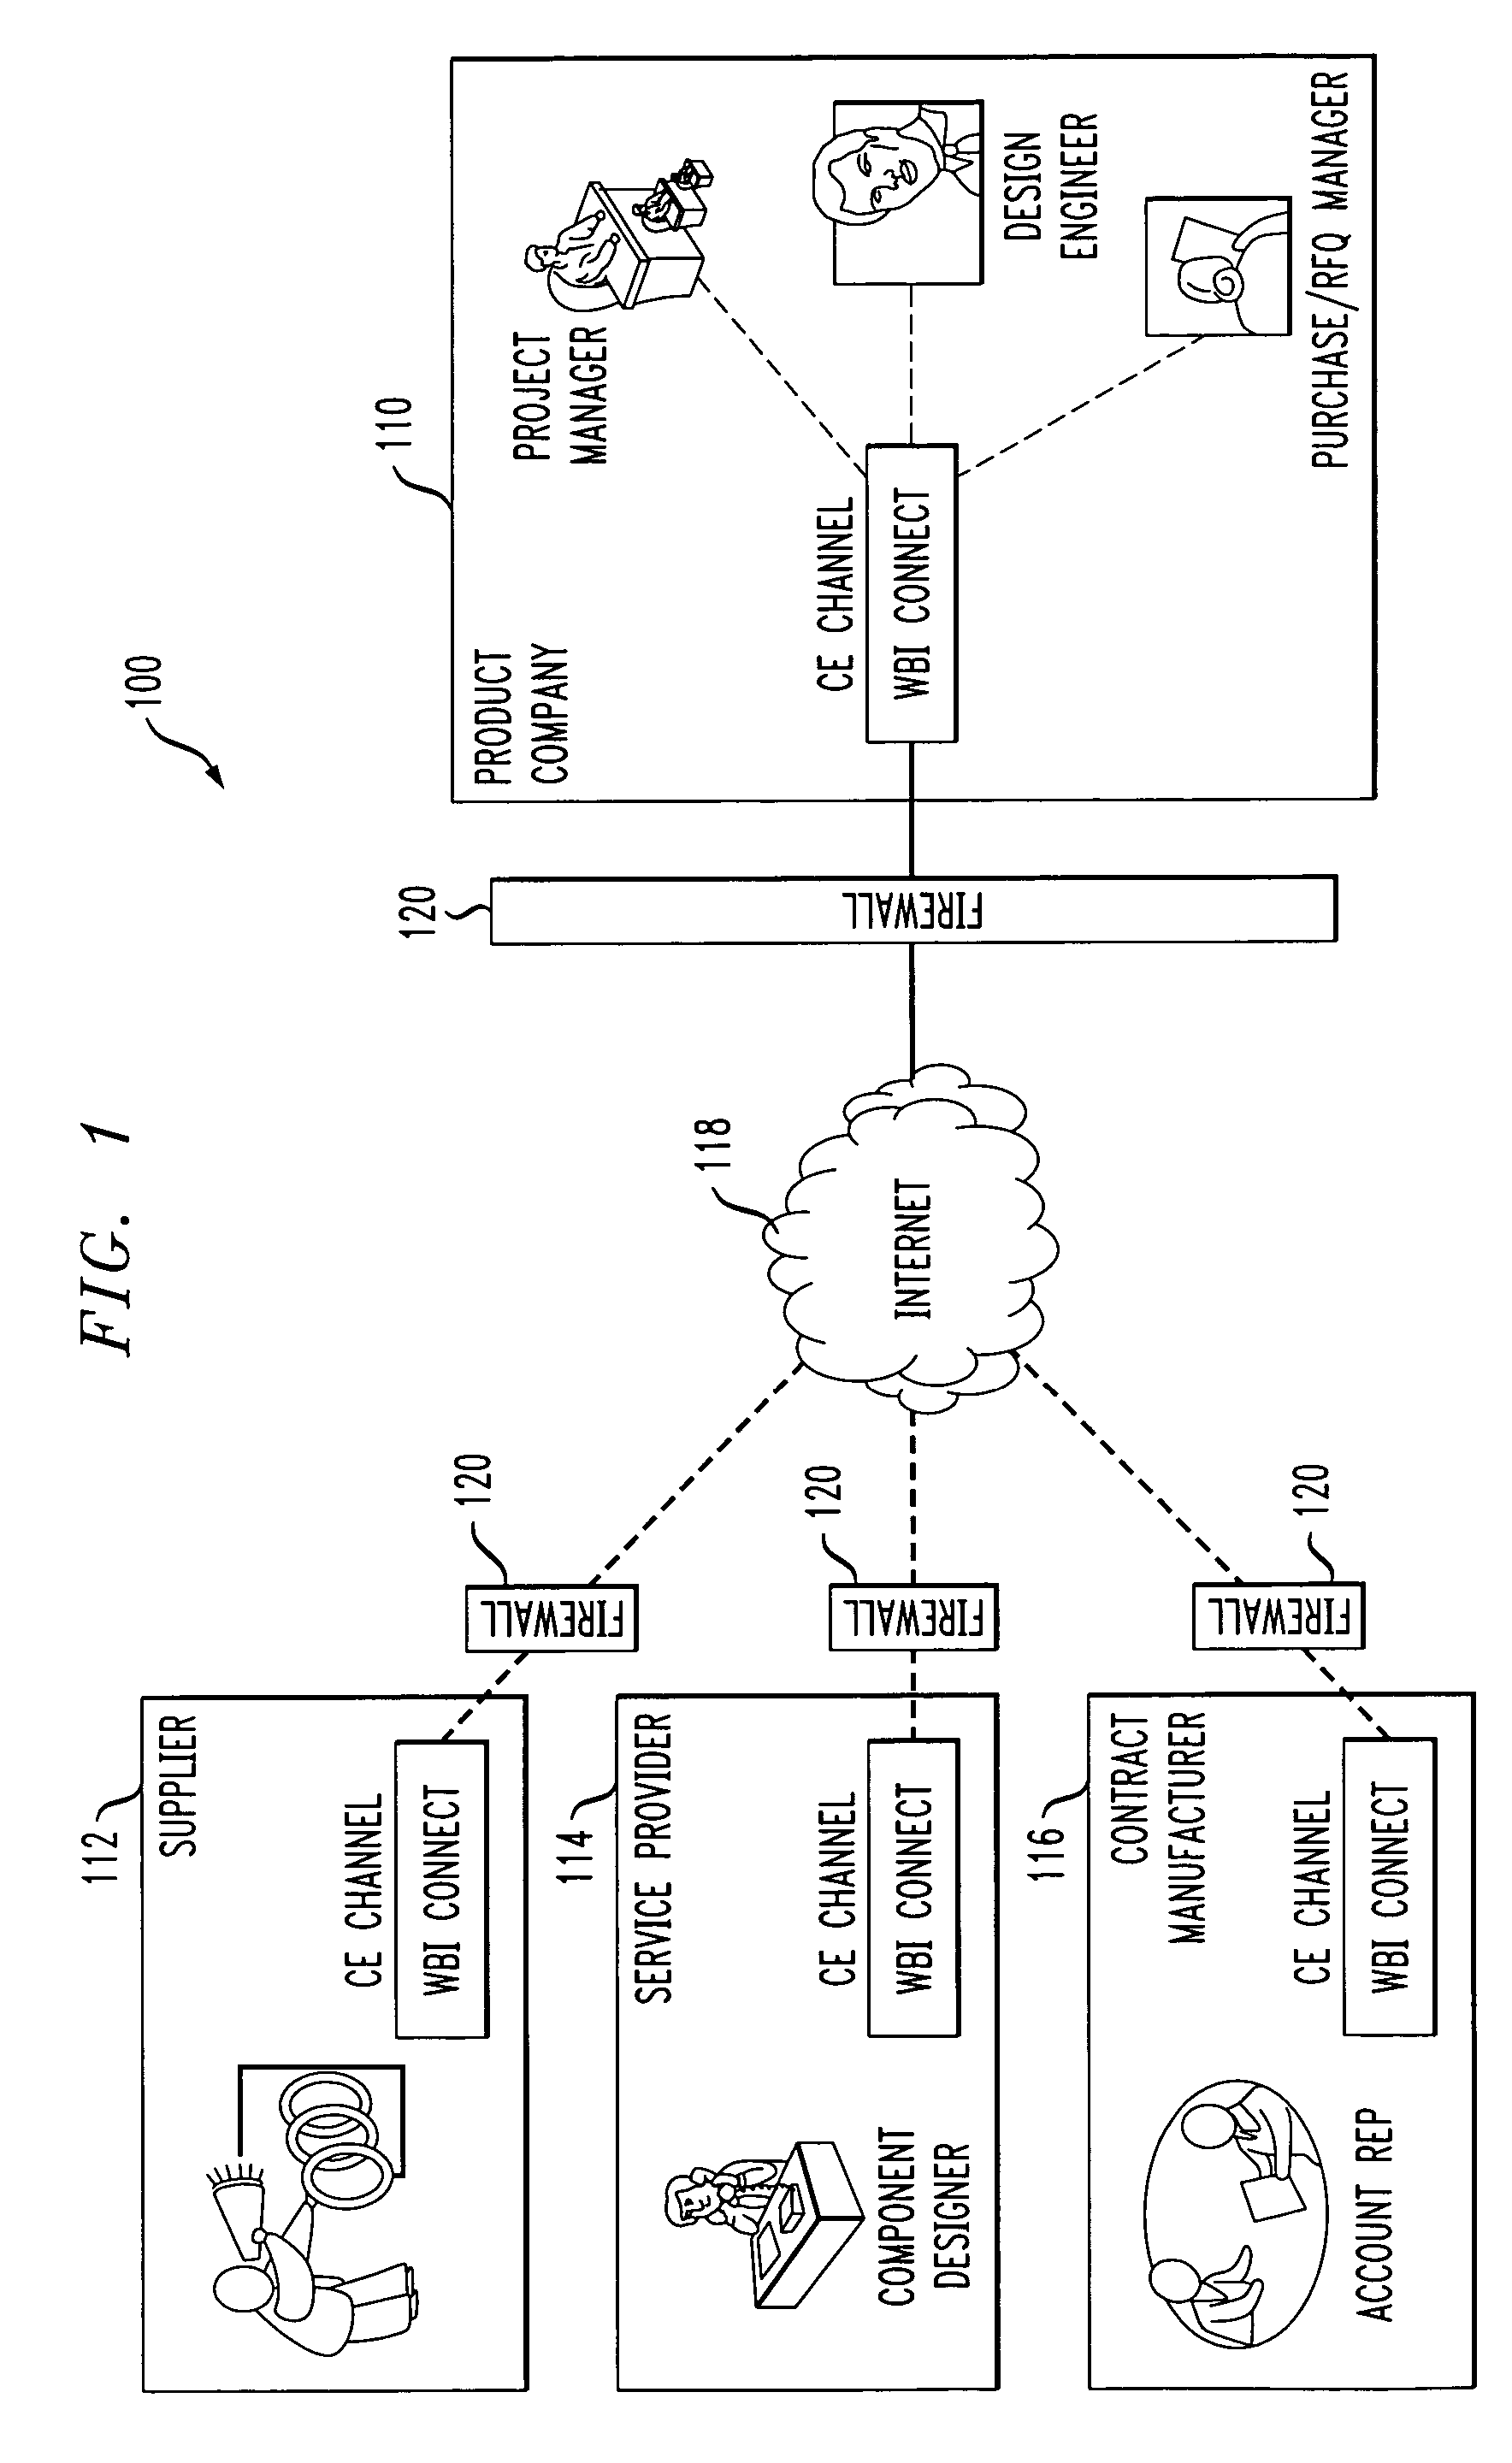 Methods and apparatus for information hyperchain management for on-demand business collaboration